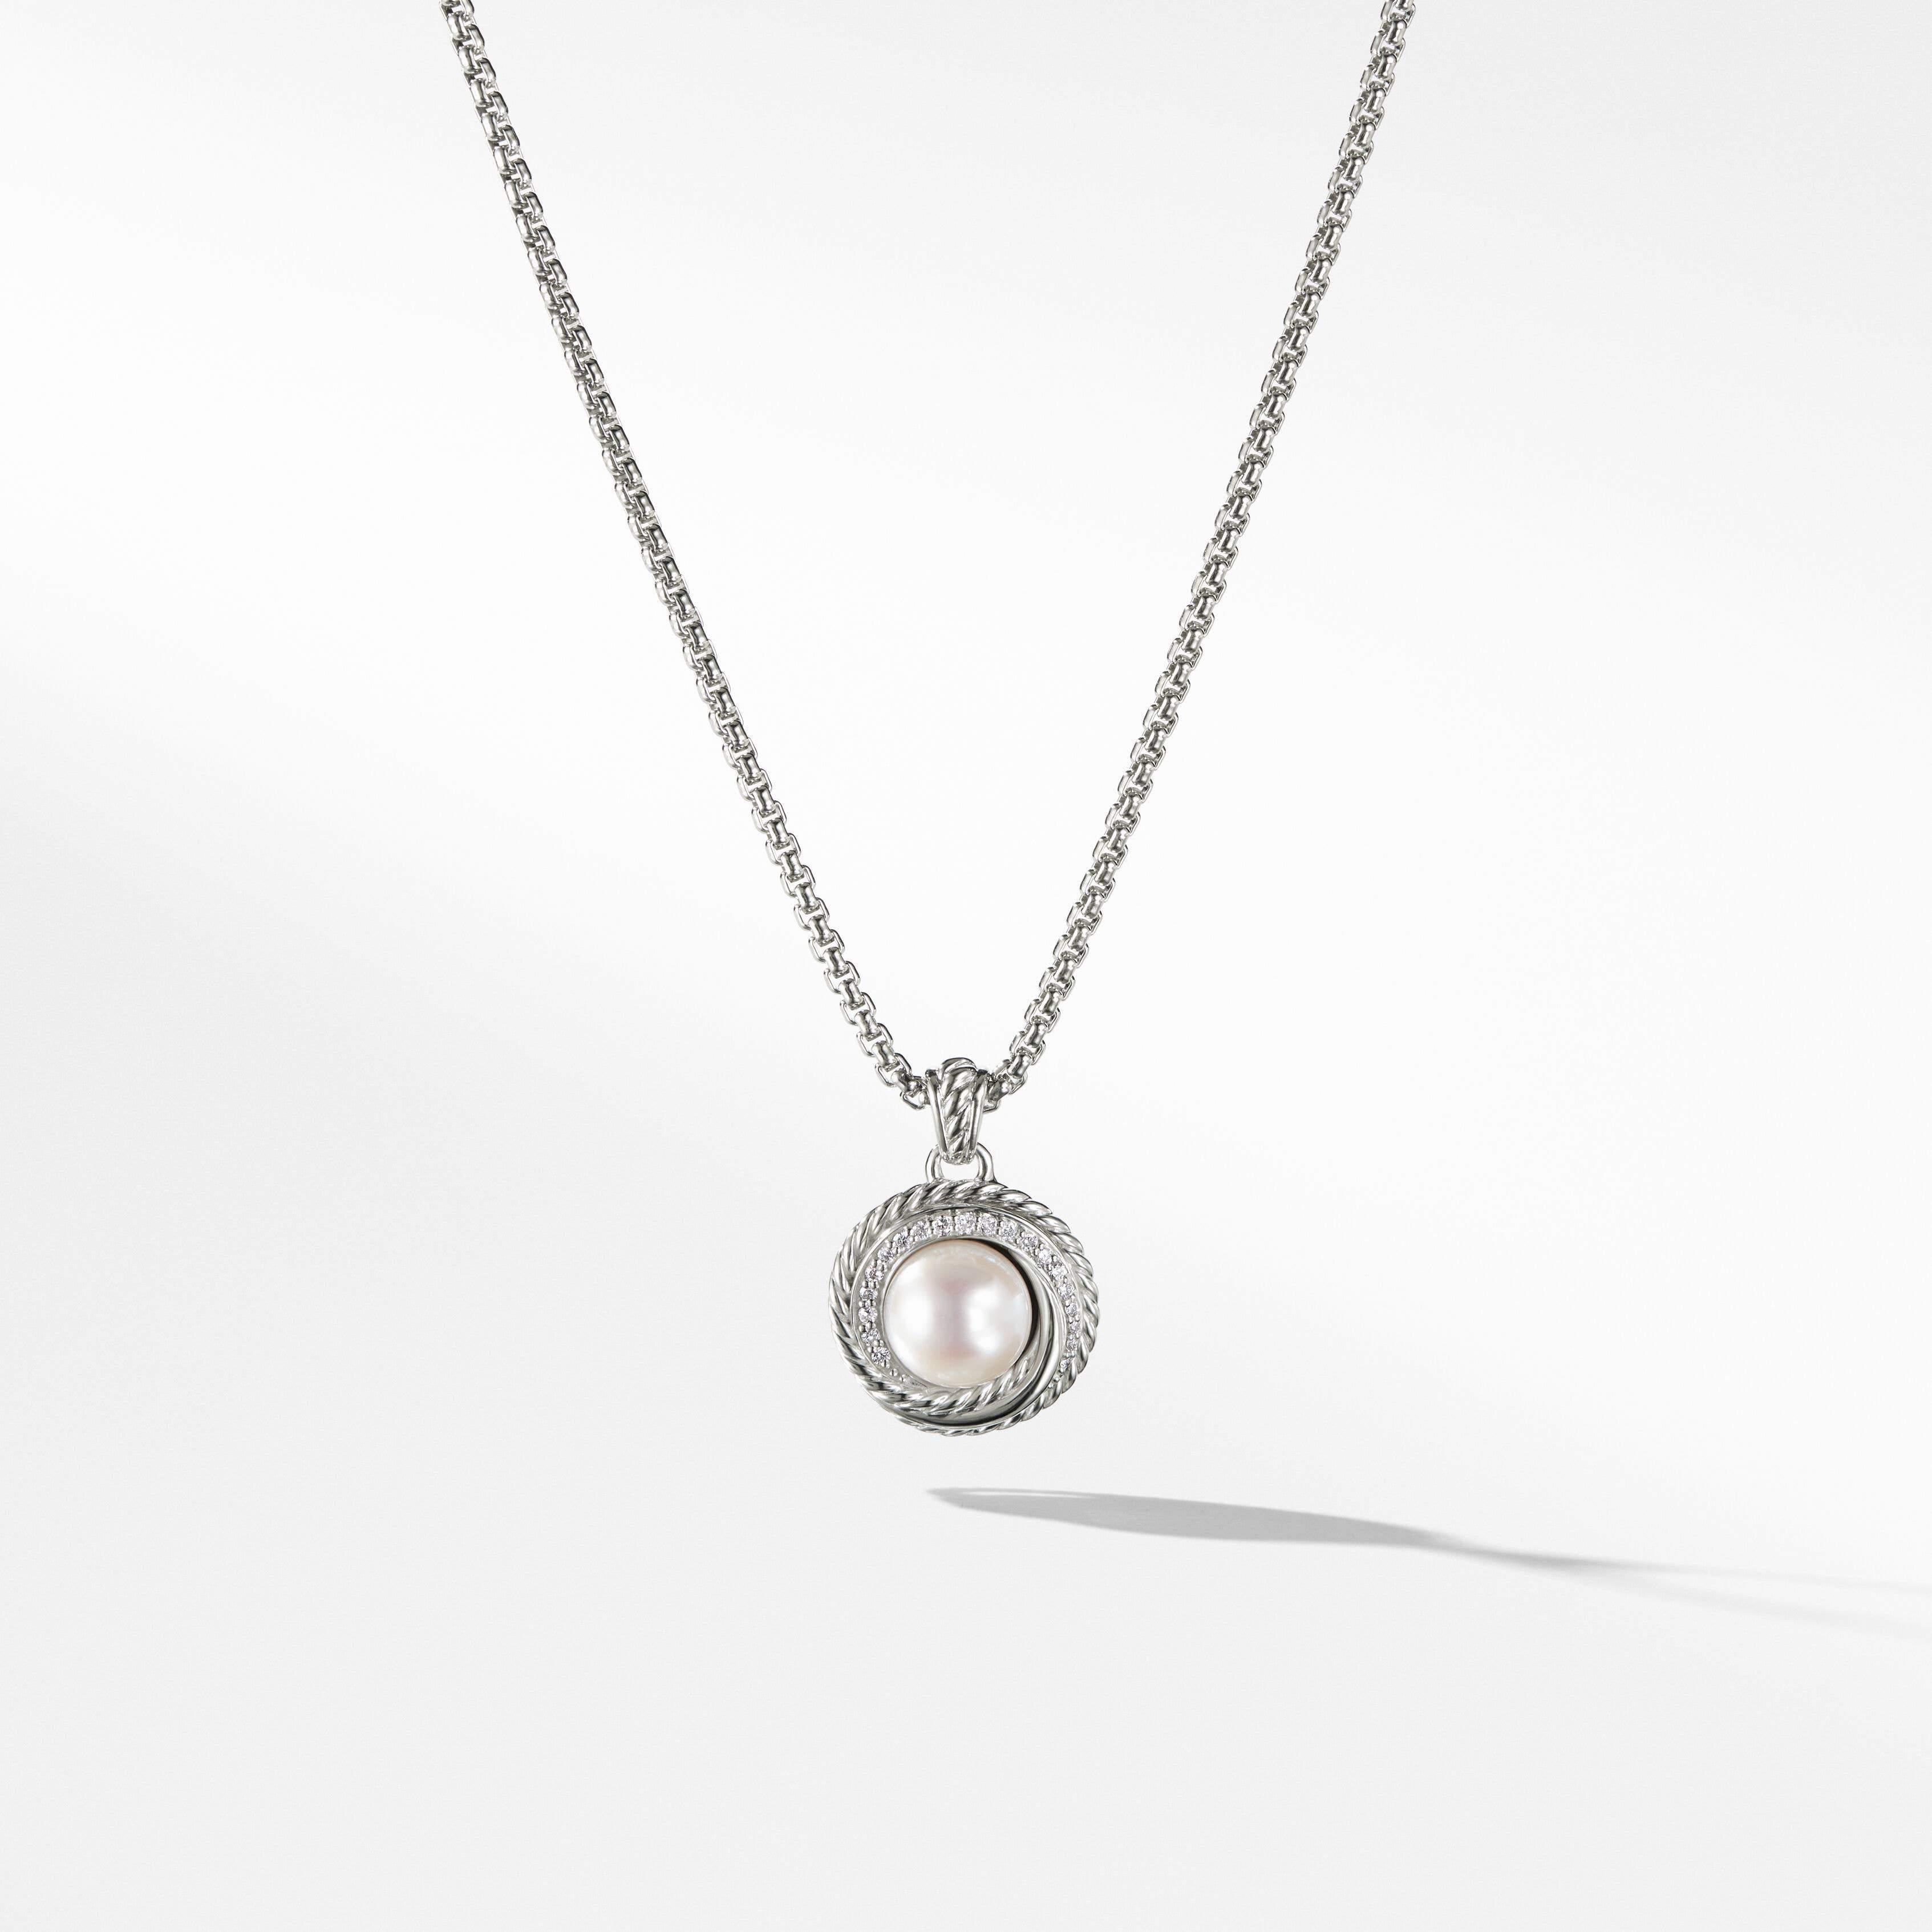 Crossover Pearl Pendant Necklace with Pavé Diamonds